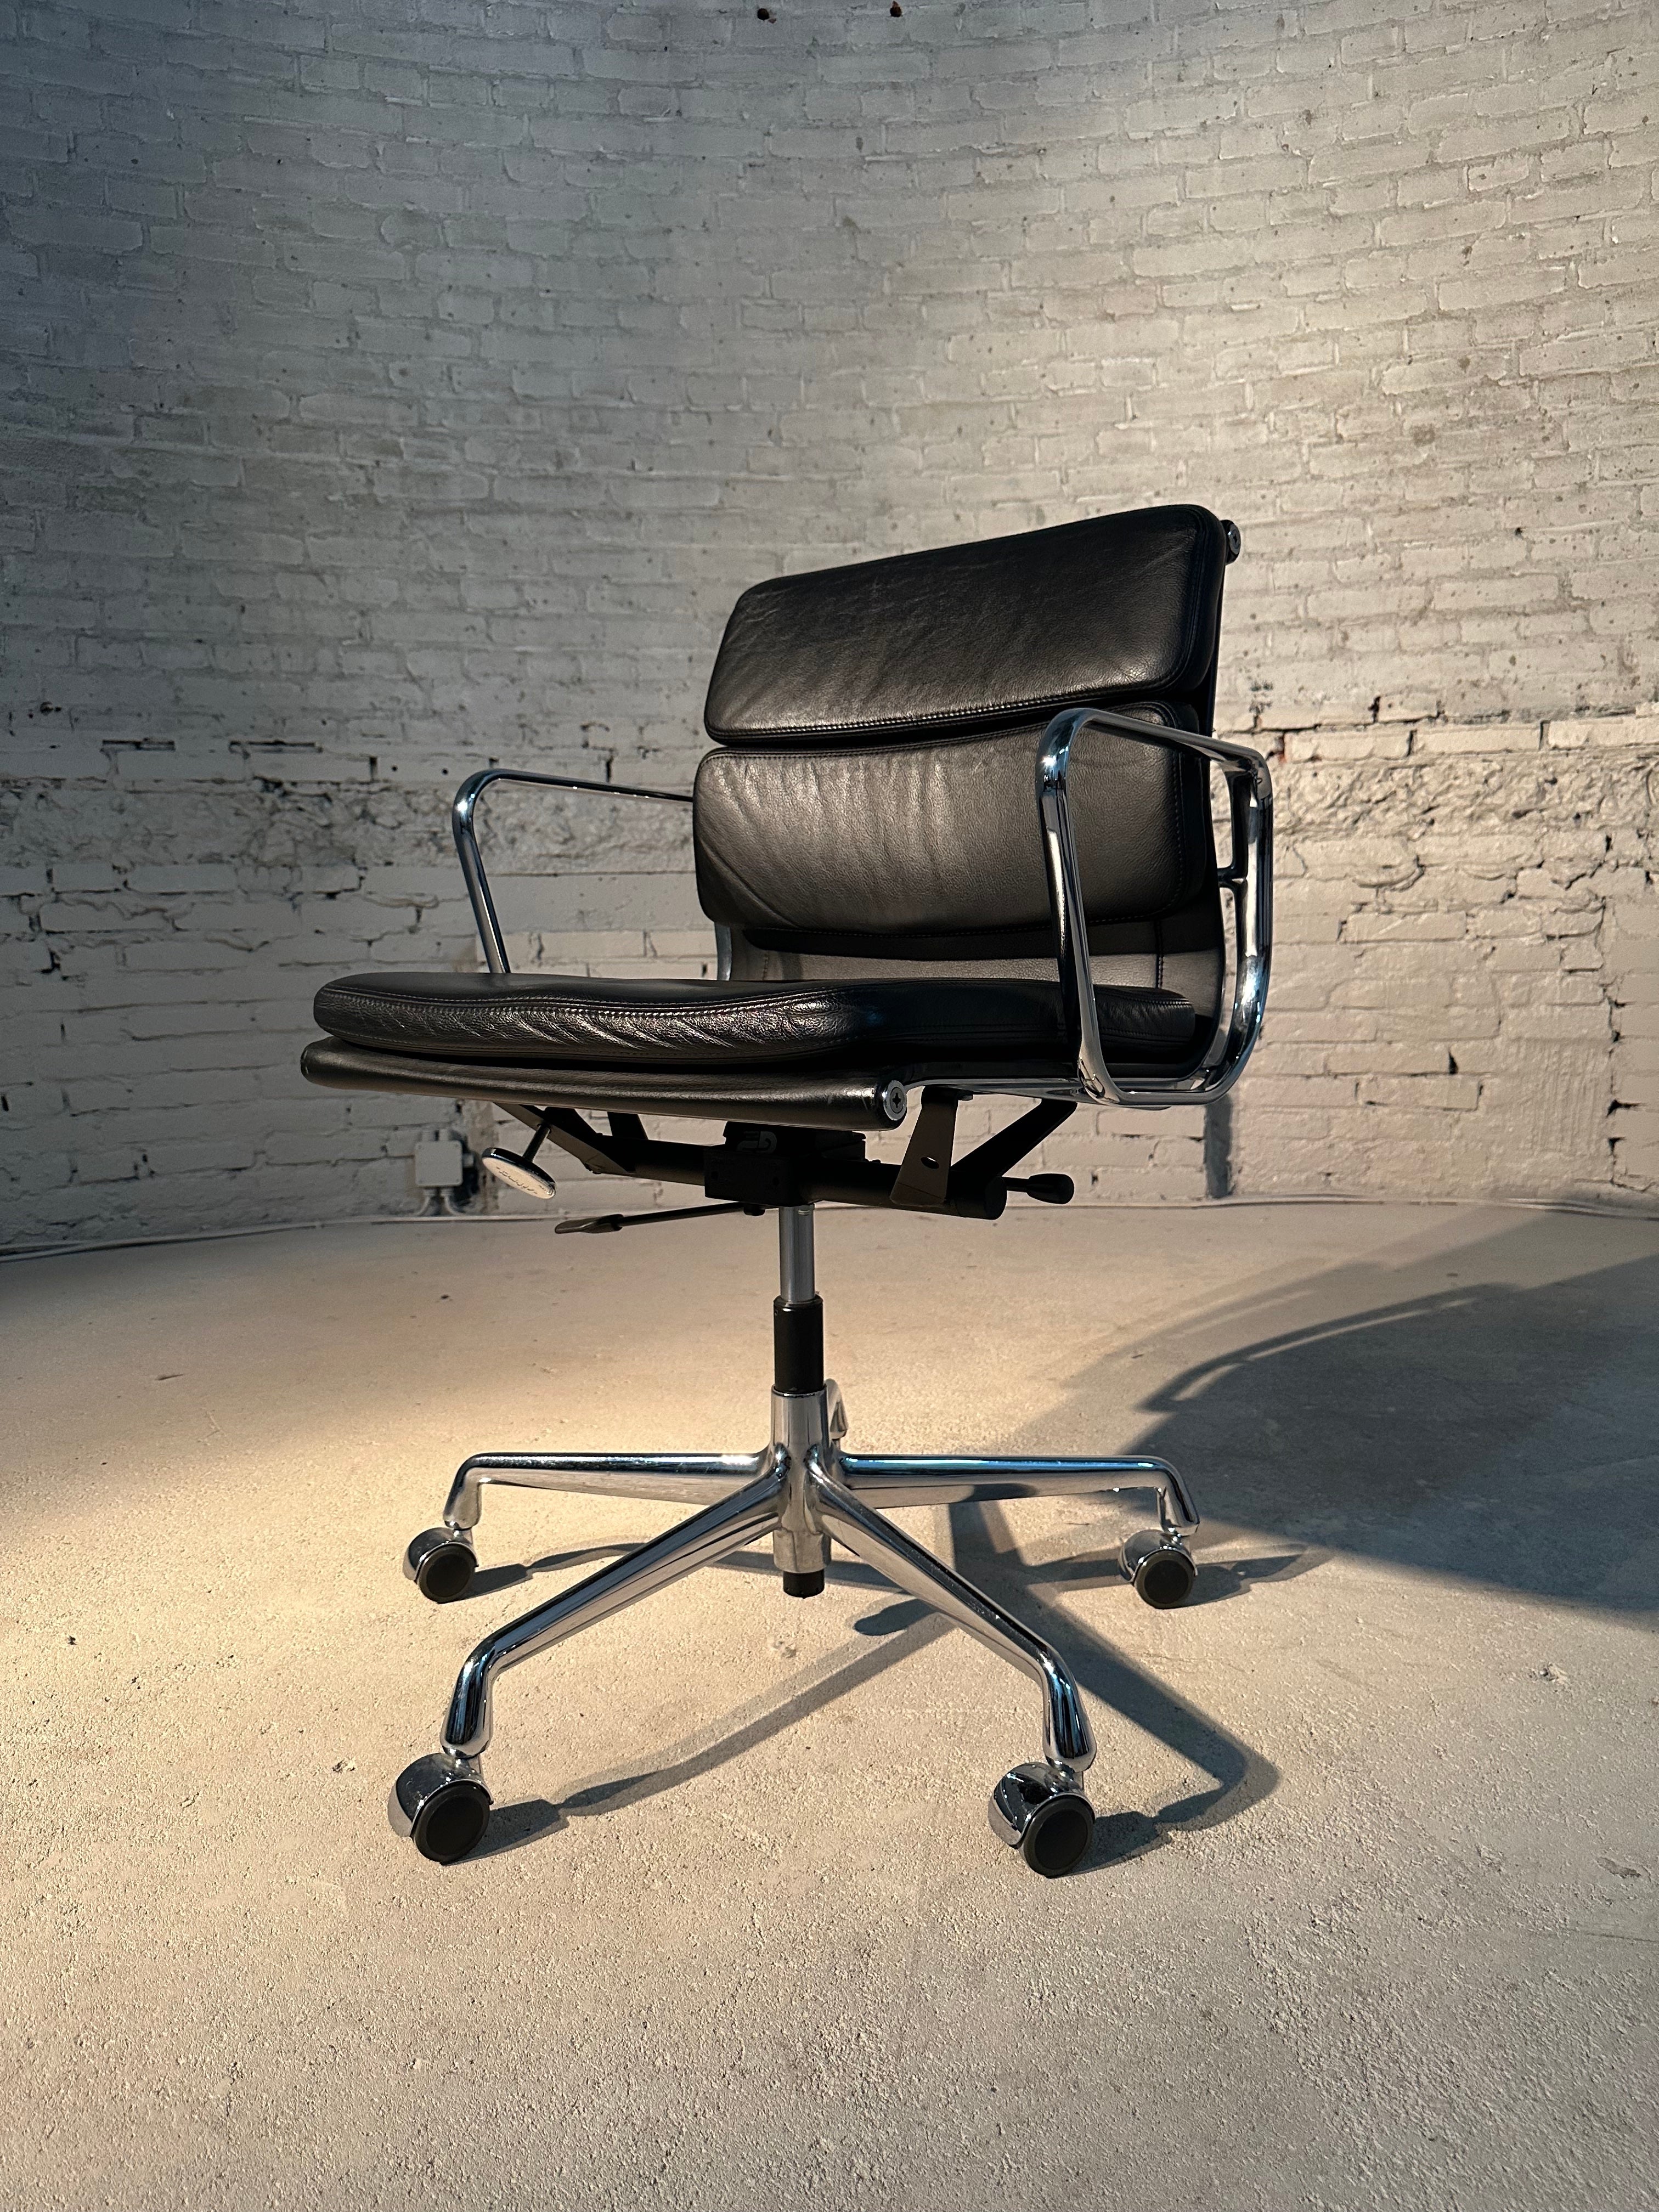 EA 217 Office Chair designed by Charles & Ray Eames, made by Herman Miller